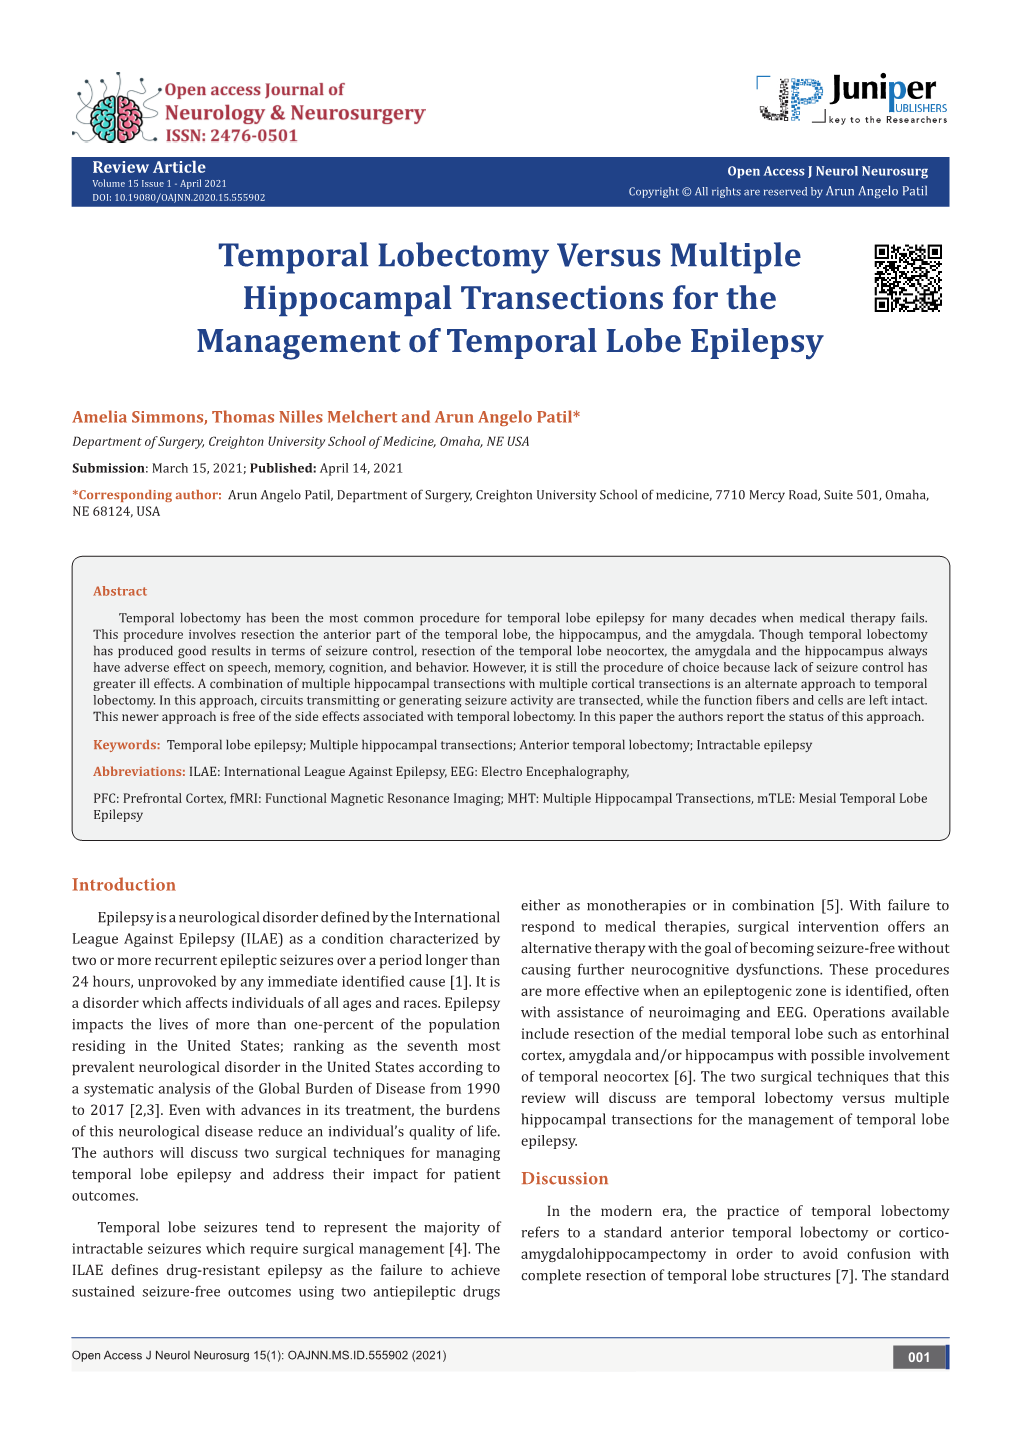 Temporal Lobectomy Versus Multiple Hippocampal Transections for the Management of Temporal Lobe Epilepsy